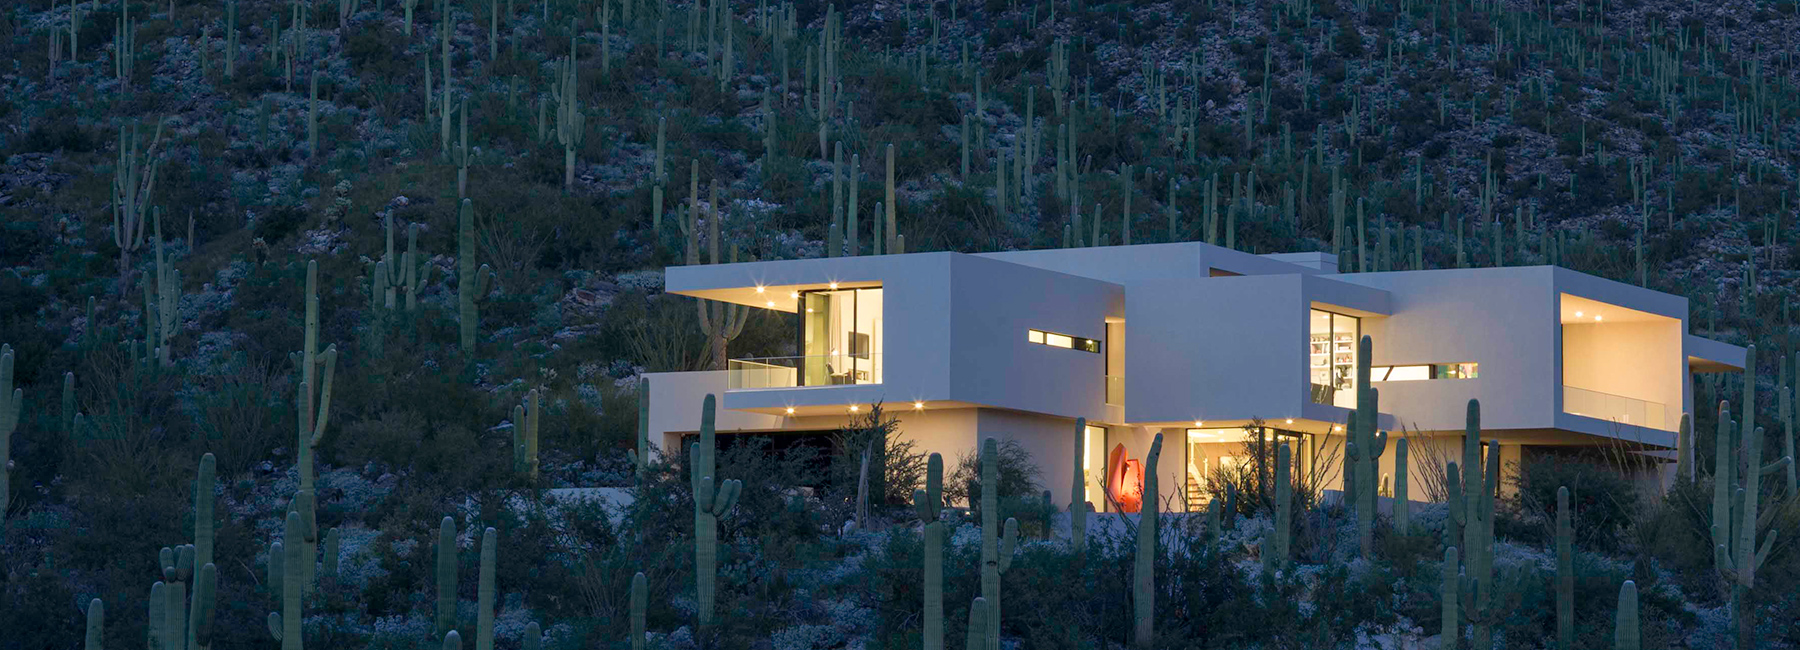 kevin B howard architects integrates art-filled home into desert at sabino springs